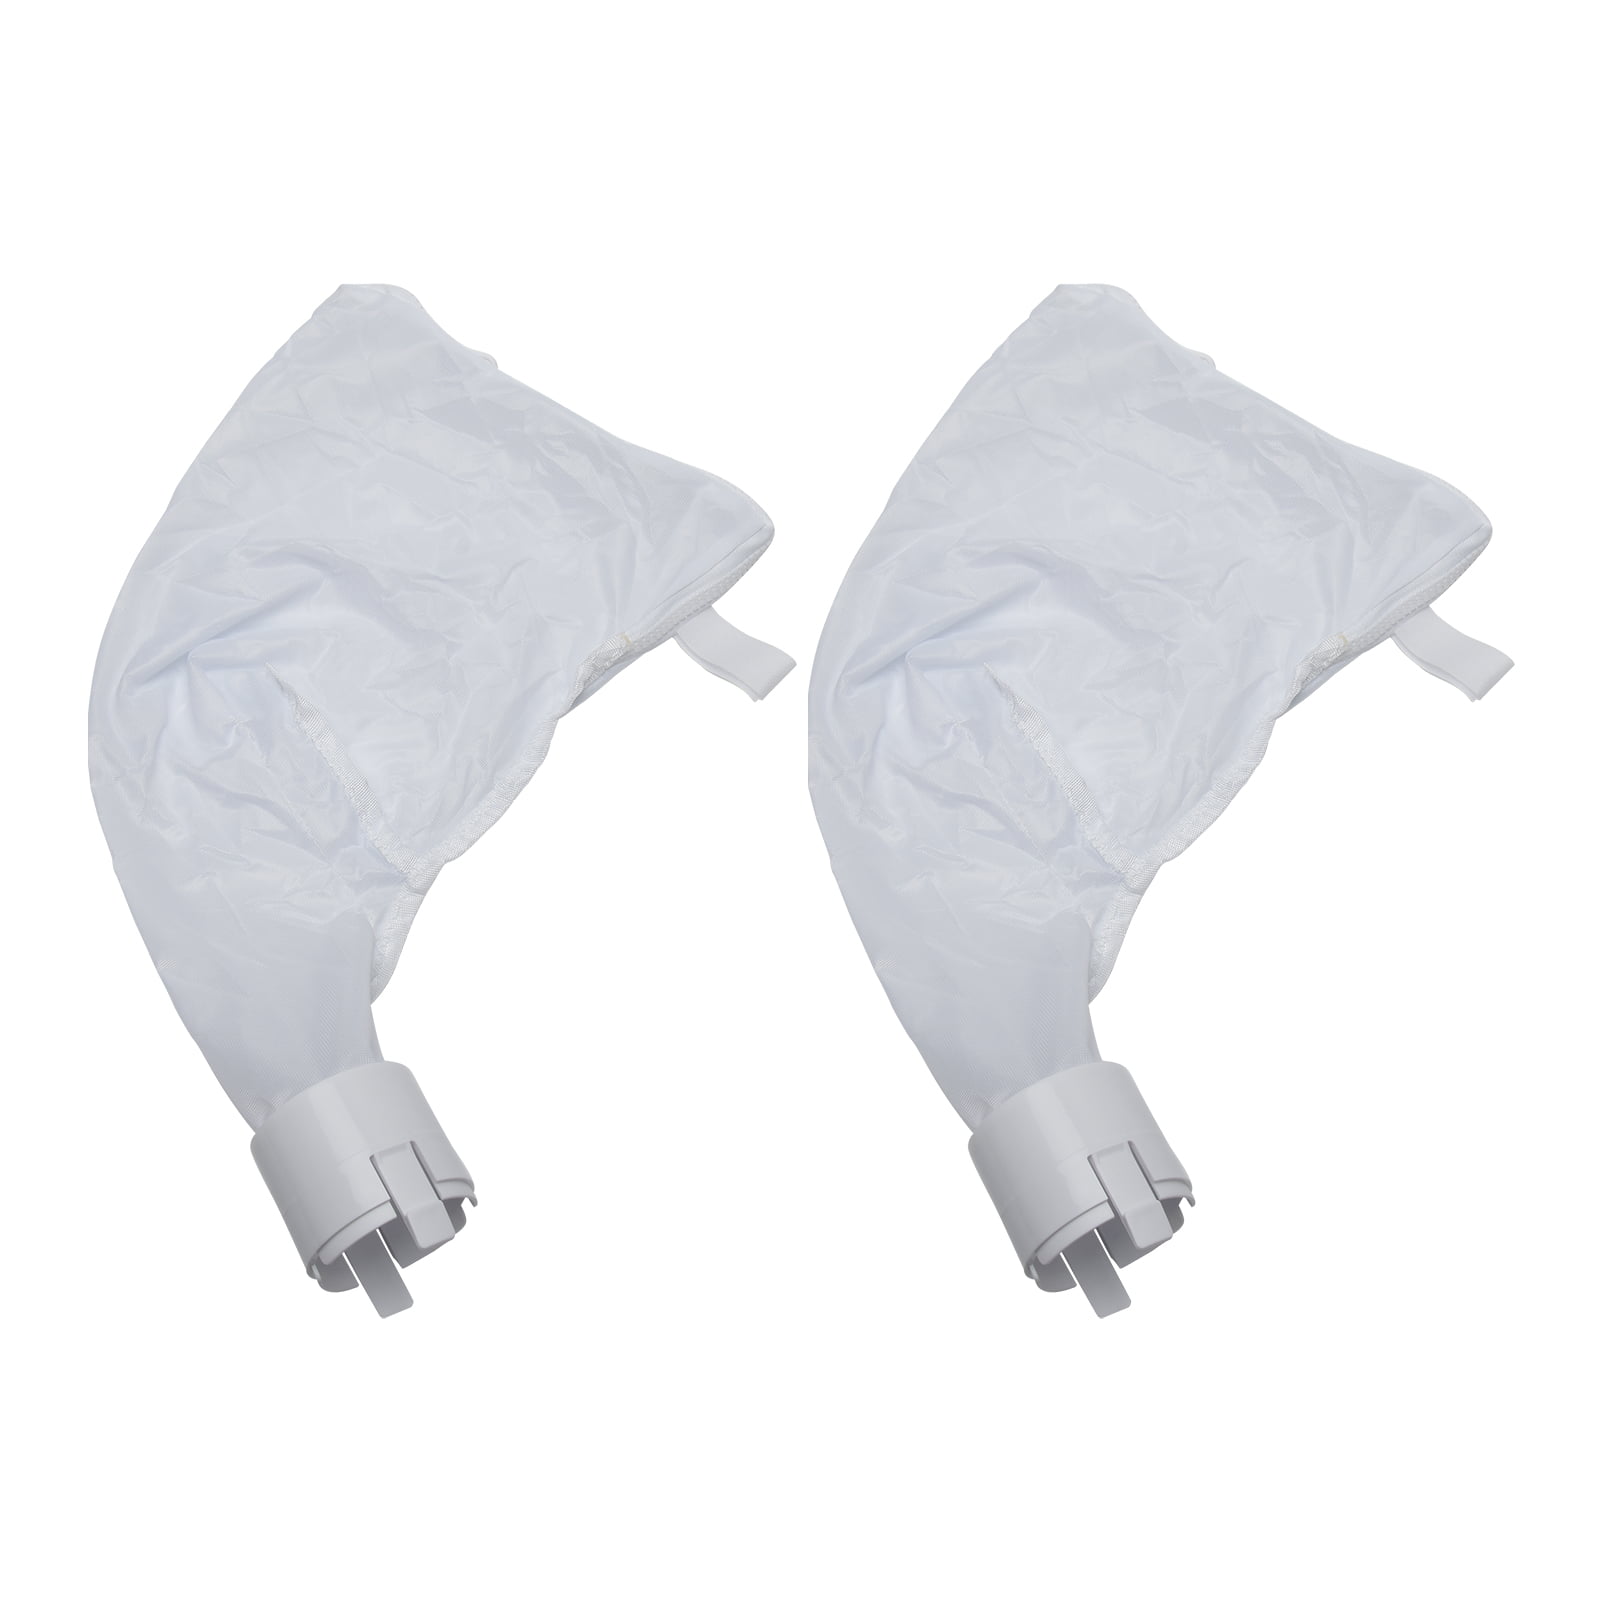 Filter Bag For Polaris 360 Or 380 Collects Pool Debris In Bag 2 Pack 